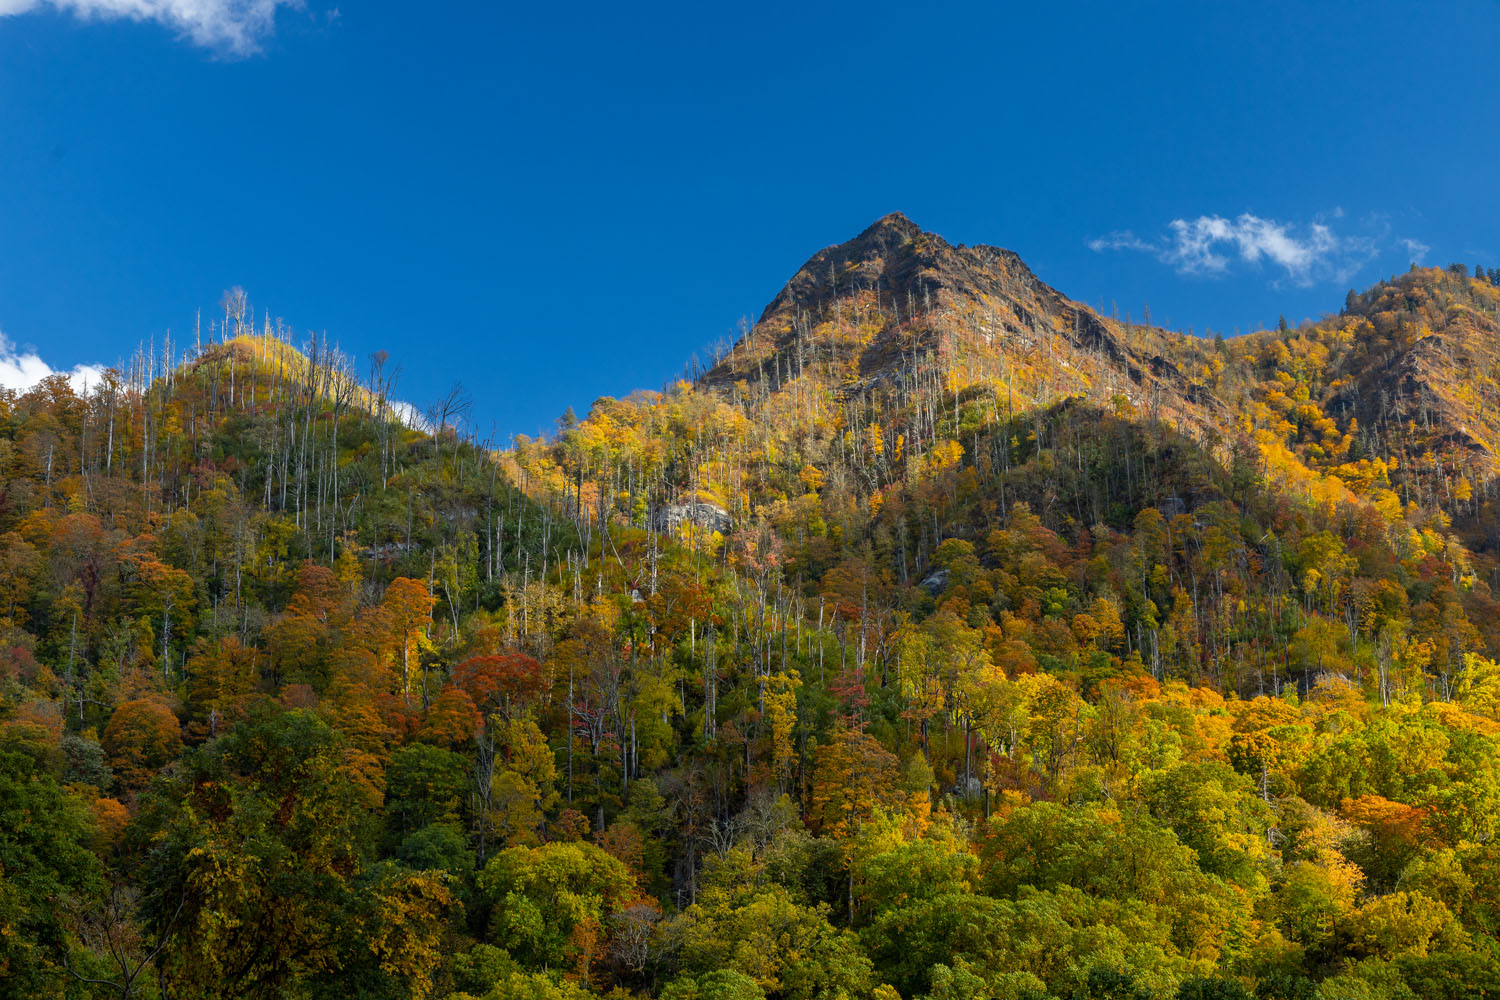 The Chimneys offer one of the great hiking experiences and in autumn it often features glorious color.